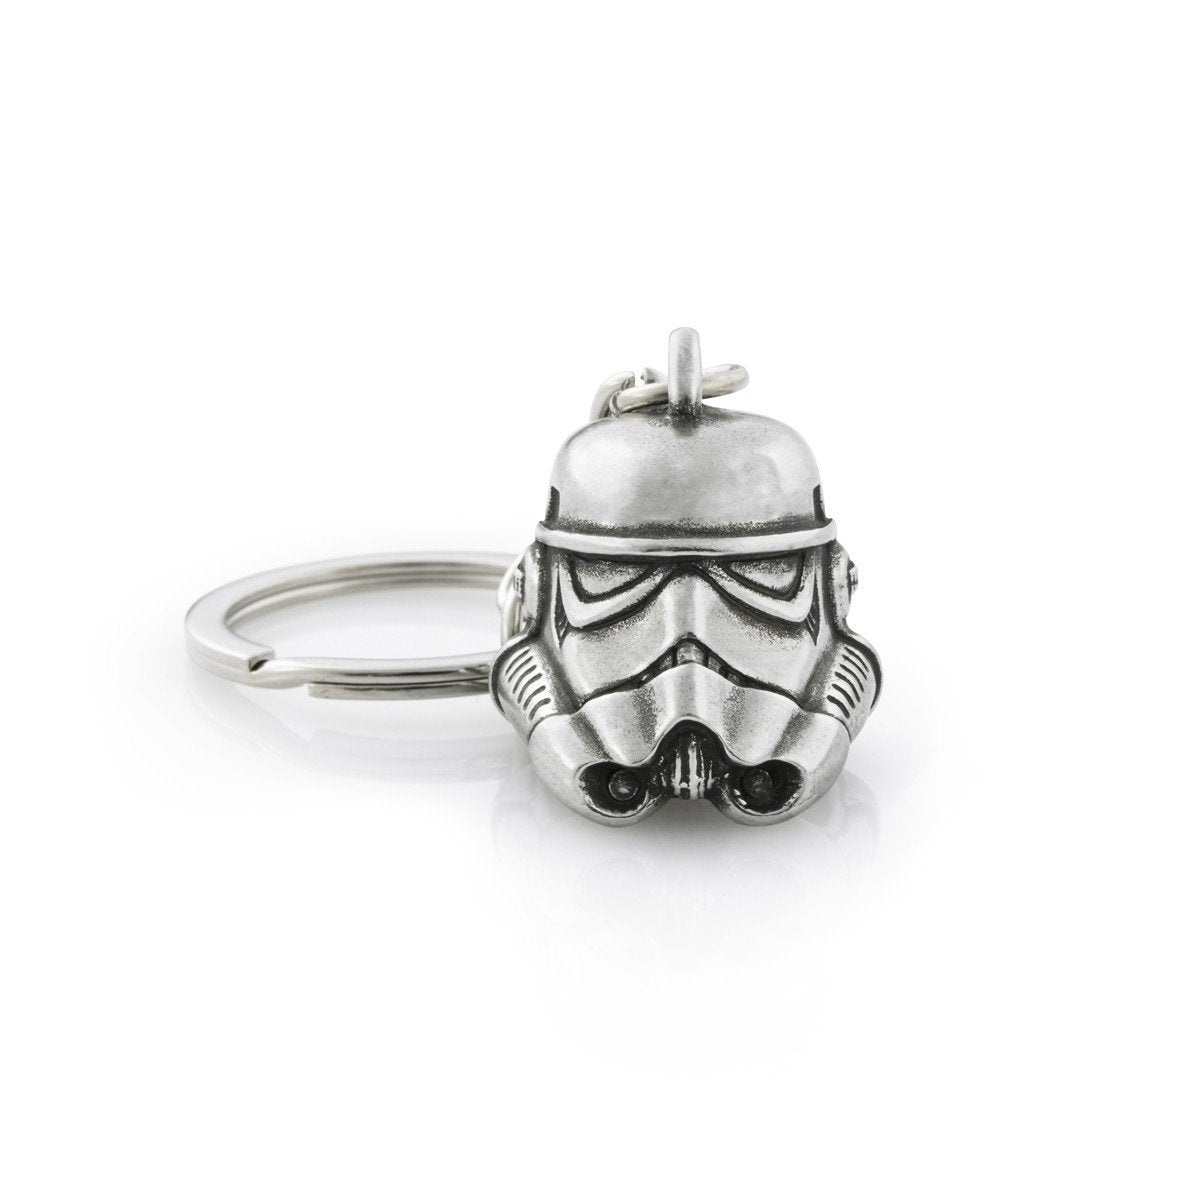 Star Wars Imperial Stormtrooper Keychain - Collectible Gift